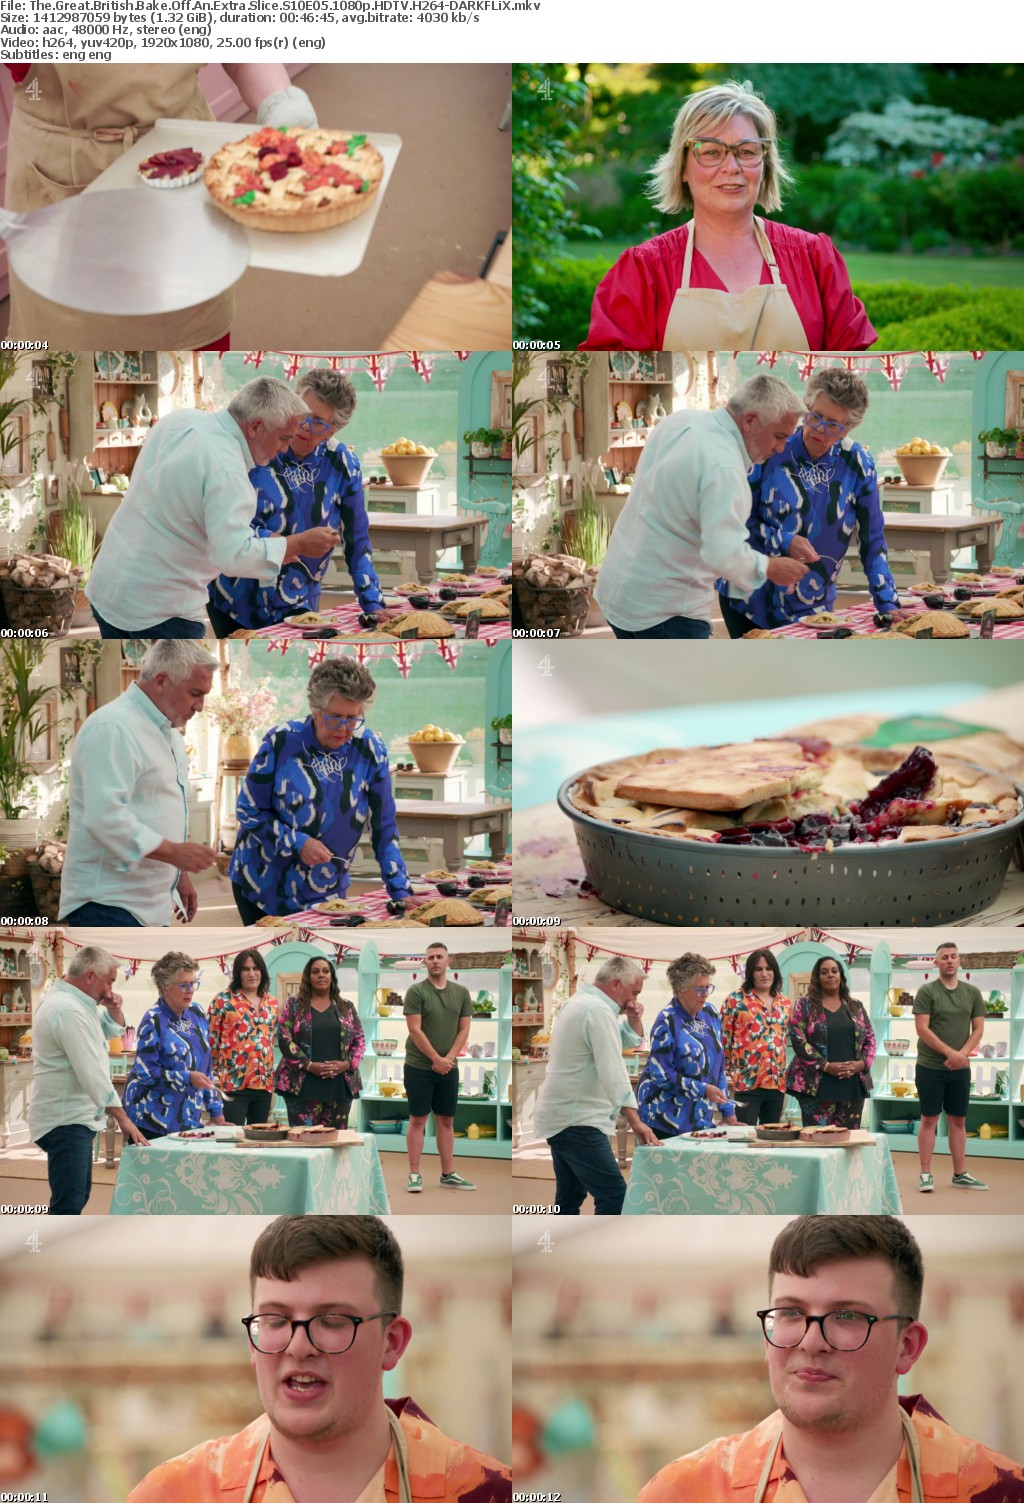 The Great British Bake Off An Extra Slice S10E05 1080p HDTV H264-DARKFLiX